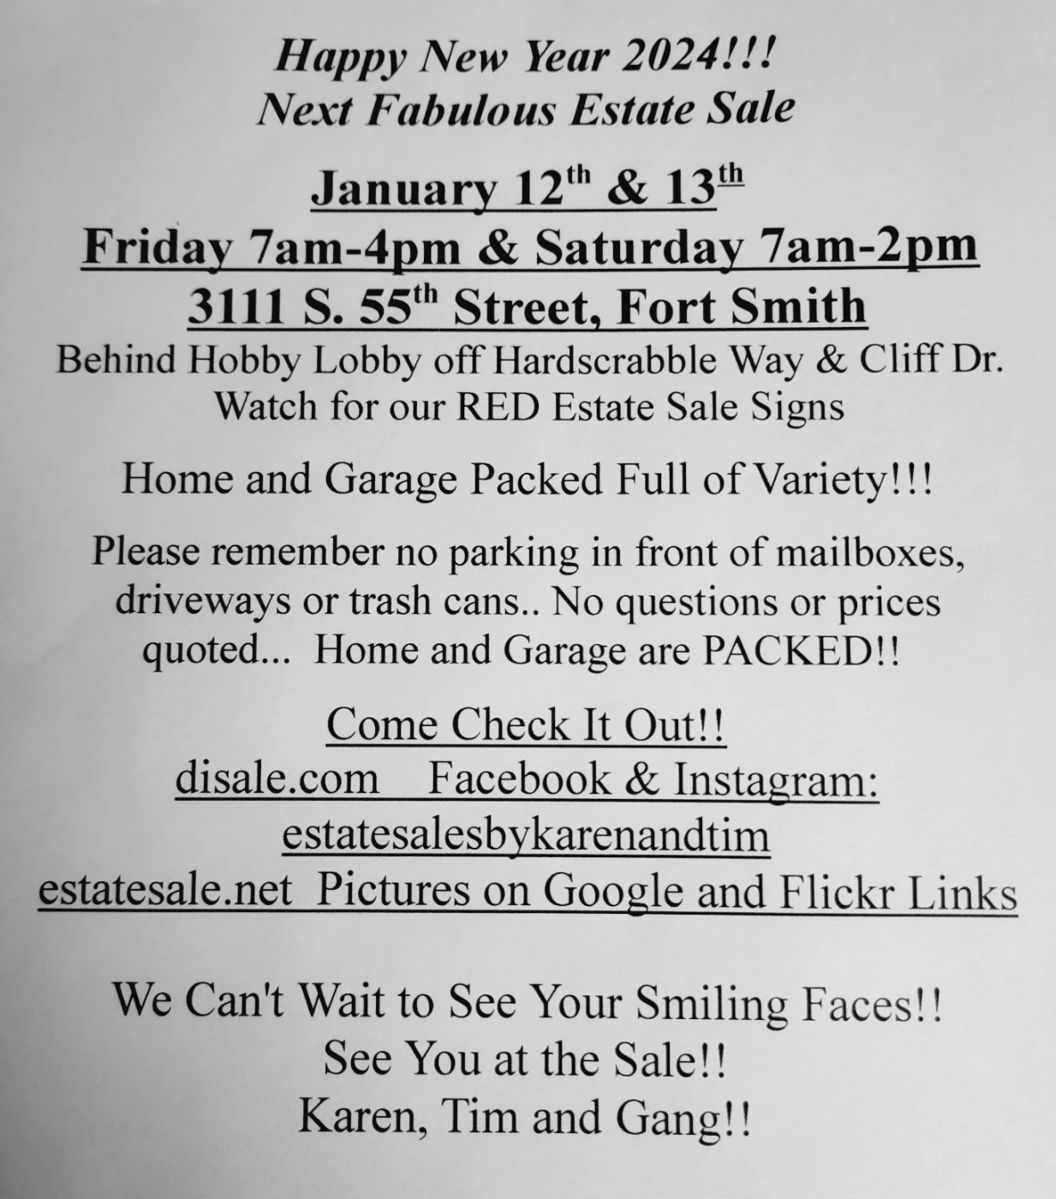 Estate Sale in Fort Smith starts on 1/12/2024